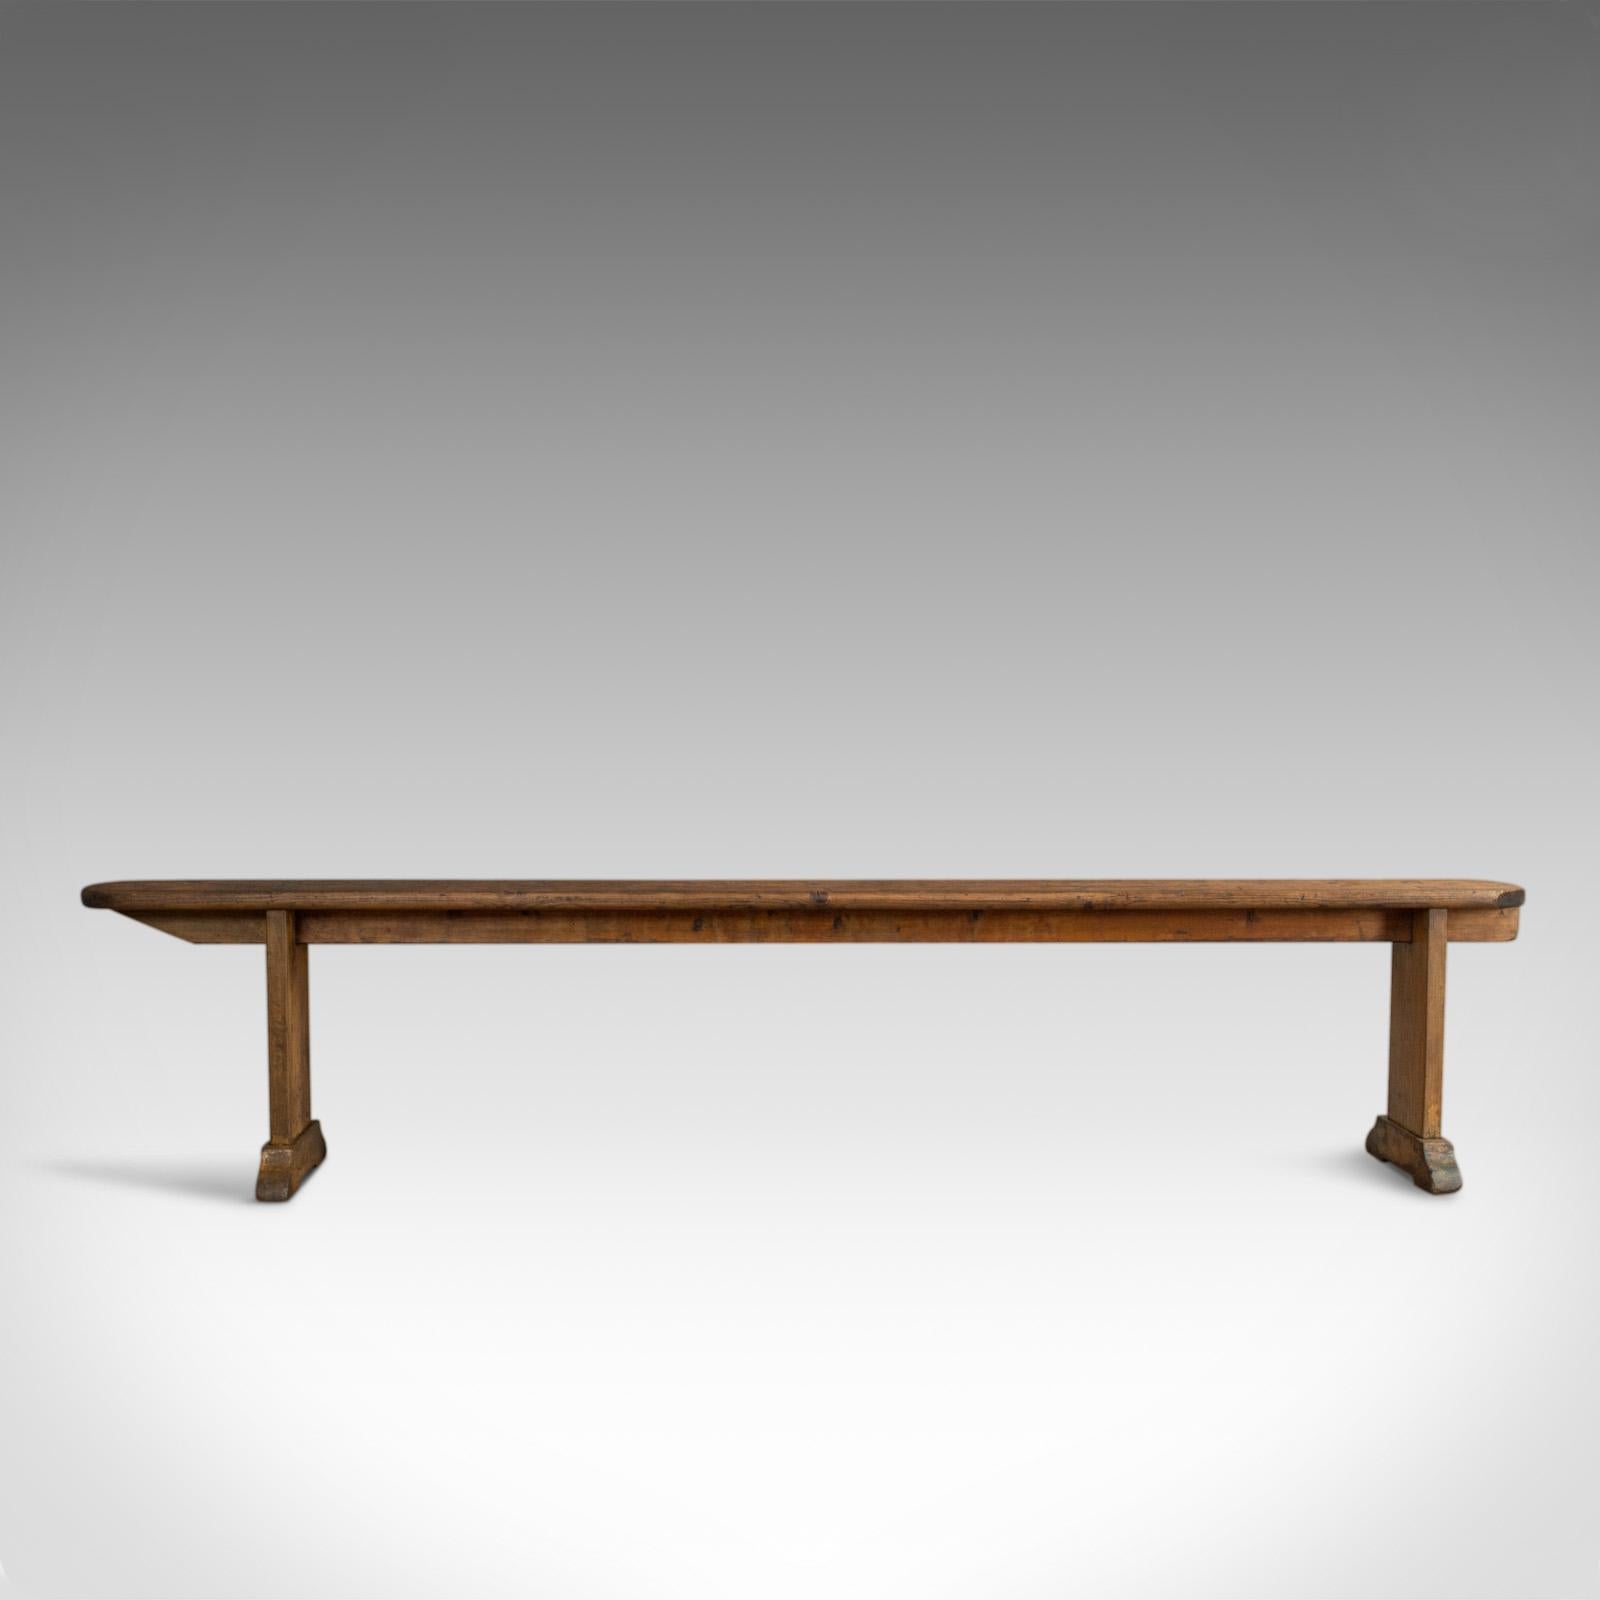 This is a long antique bench. A 7 foot 4 inch, English, Victorian kitchen pew seat dating to the late 19th century, circa 1900.

Rich biscuit hues and fine grain interest
Displaying a desirable aged patina with a warm, tactile surface
Generously